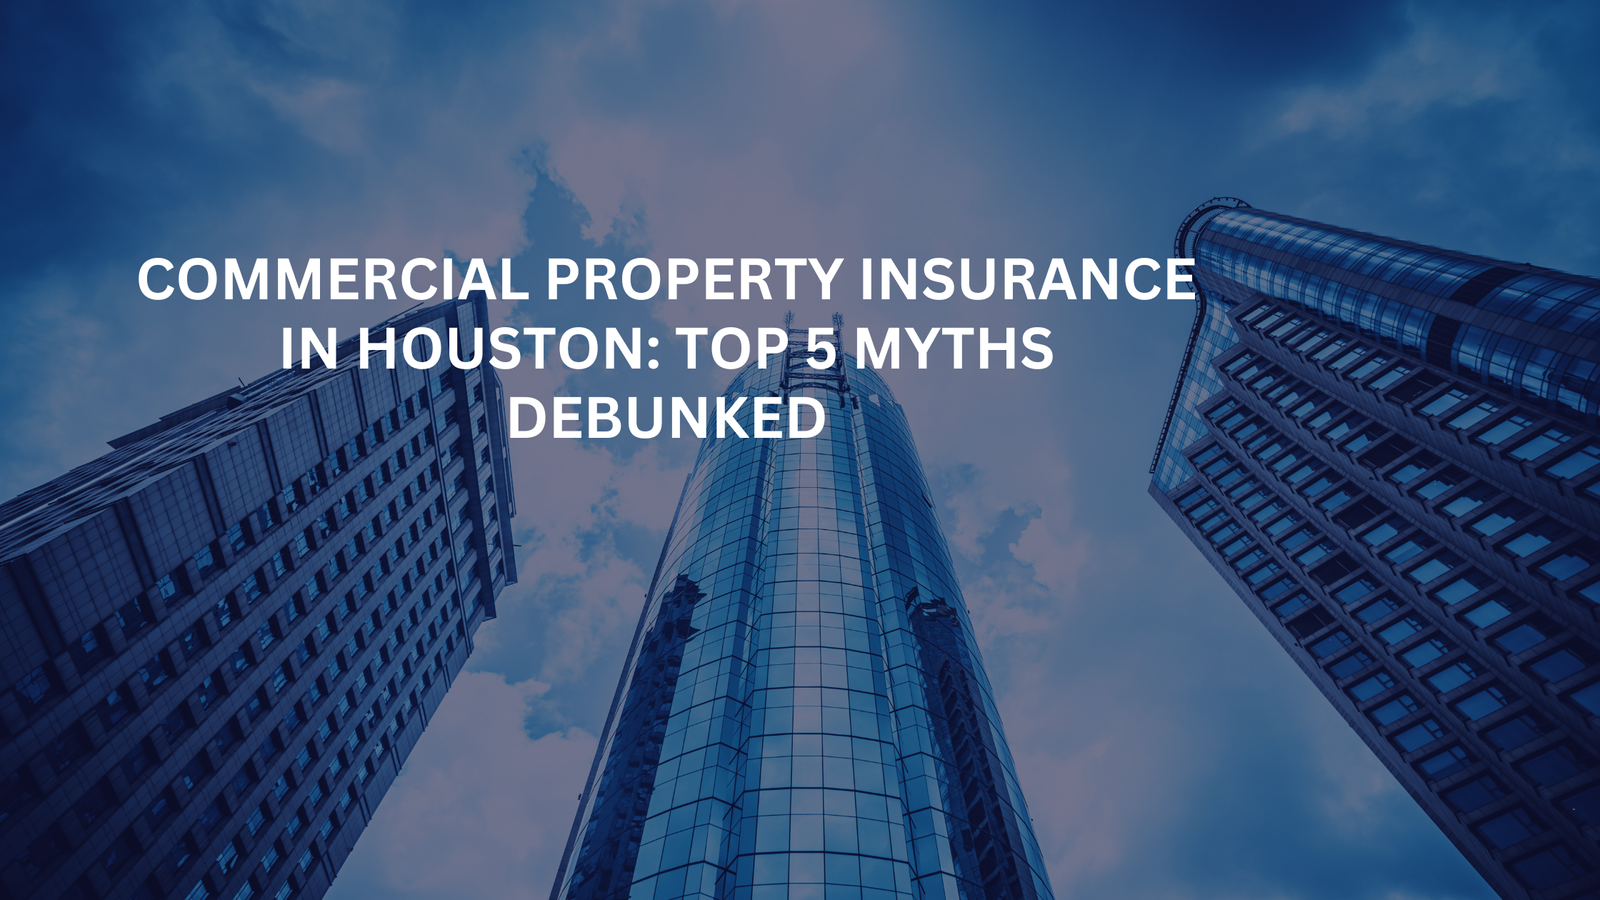 Commercial Property Insurance in Houston: Top 5 Myths Debunked